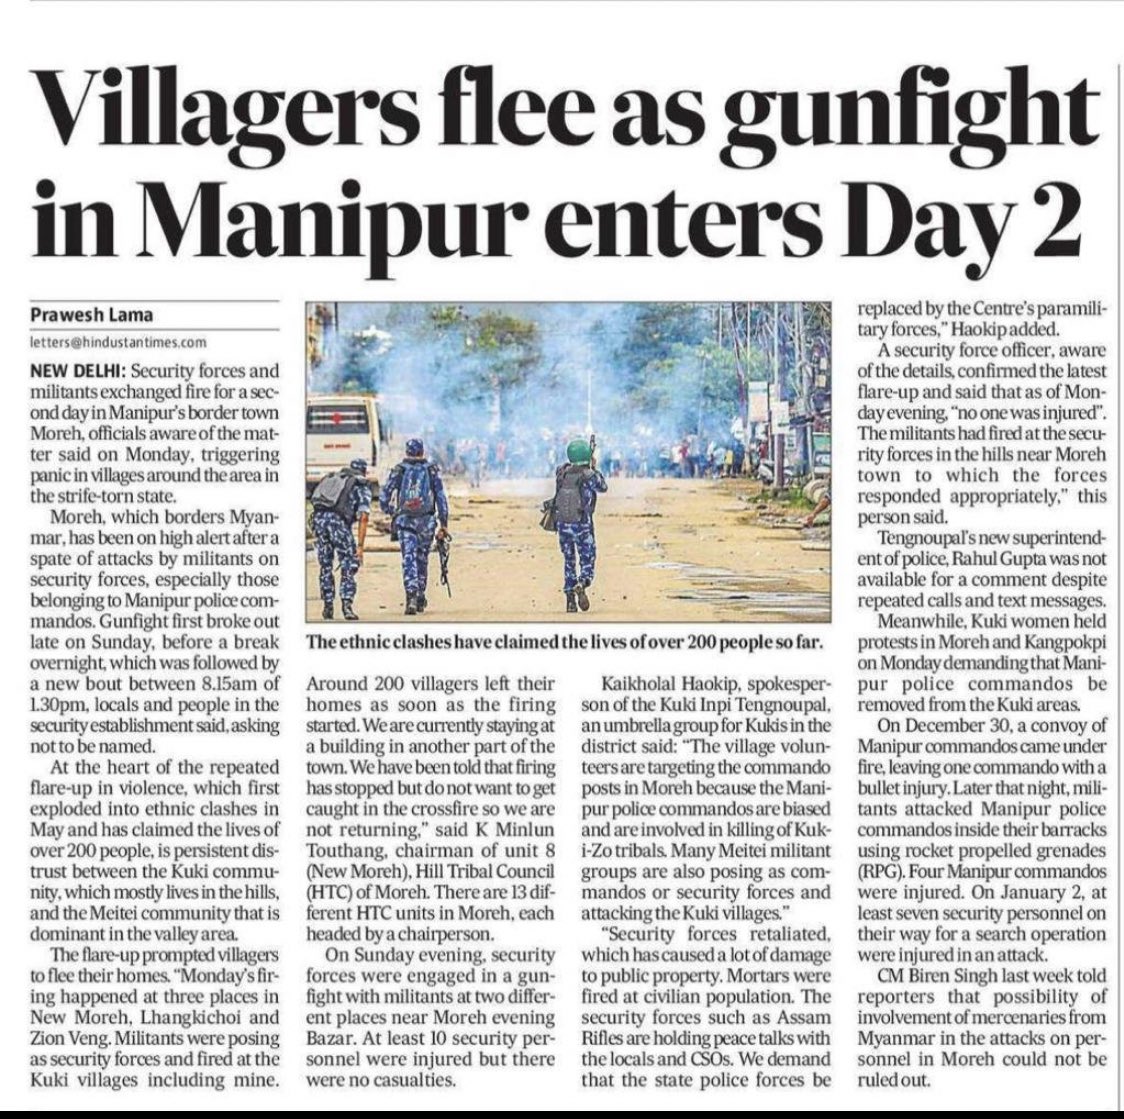 To the Bollywood celebrities 
Manipur is beautiful, it’s a part of India.
Their lives matter too.
#ManipurCivilWar